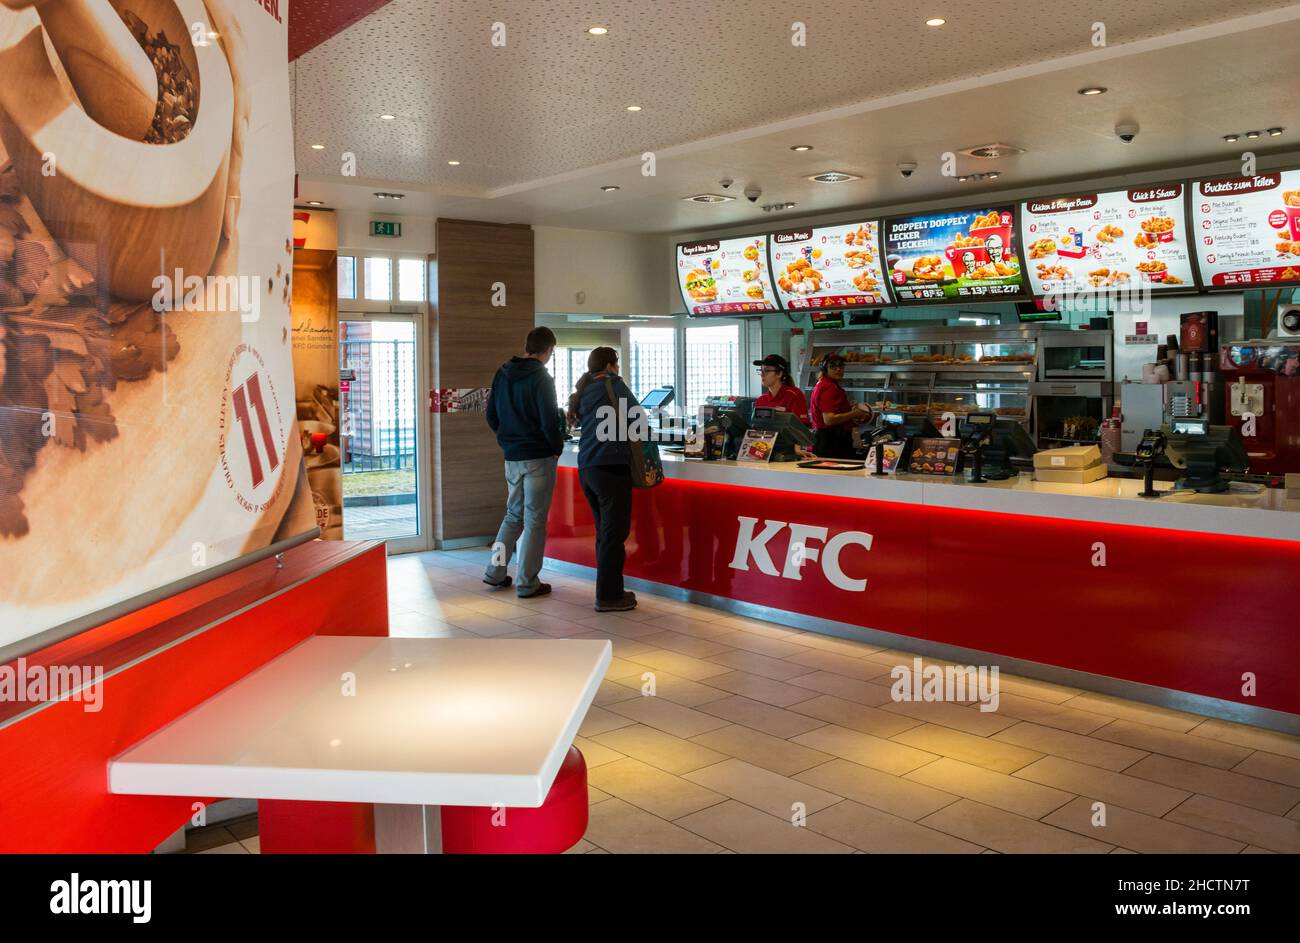 People Order Kentucky Fried Chicken In Fast-Food Restaurant. It is a fast food restaurant chain headquartered in United States specialized in chicken Stock Photo